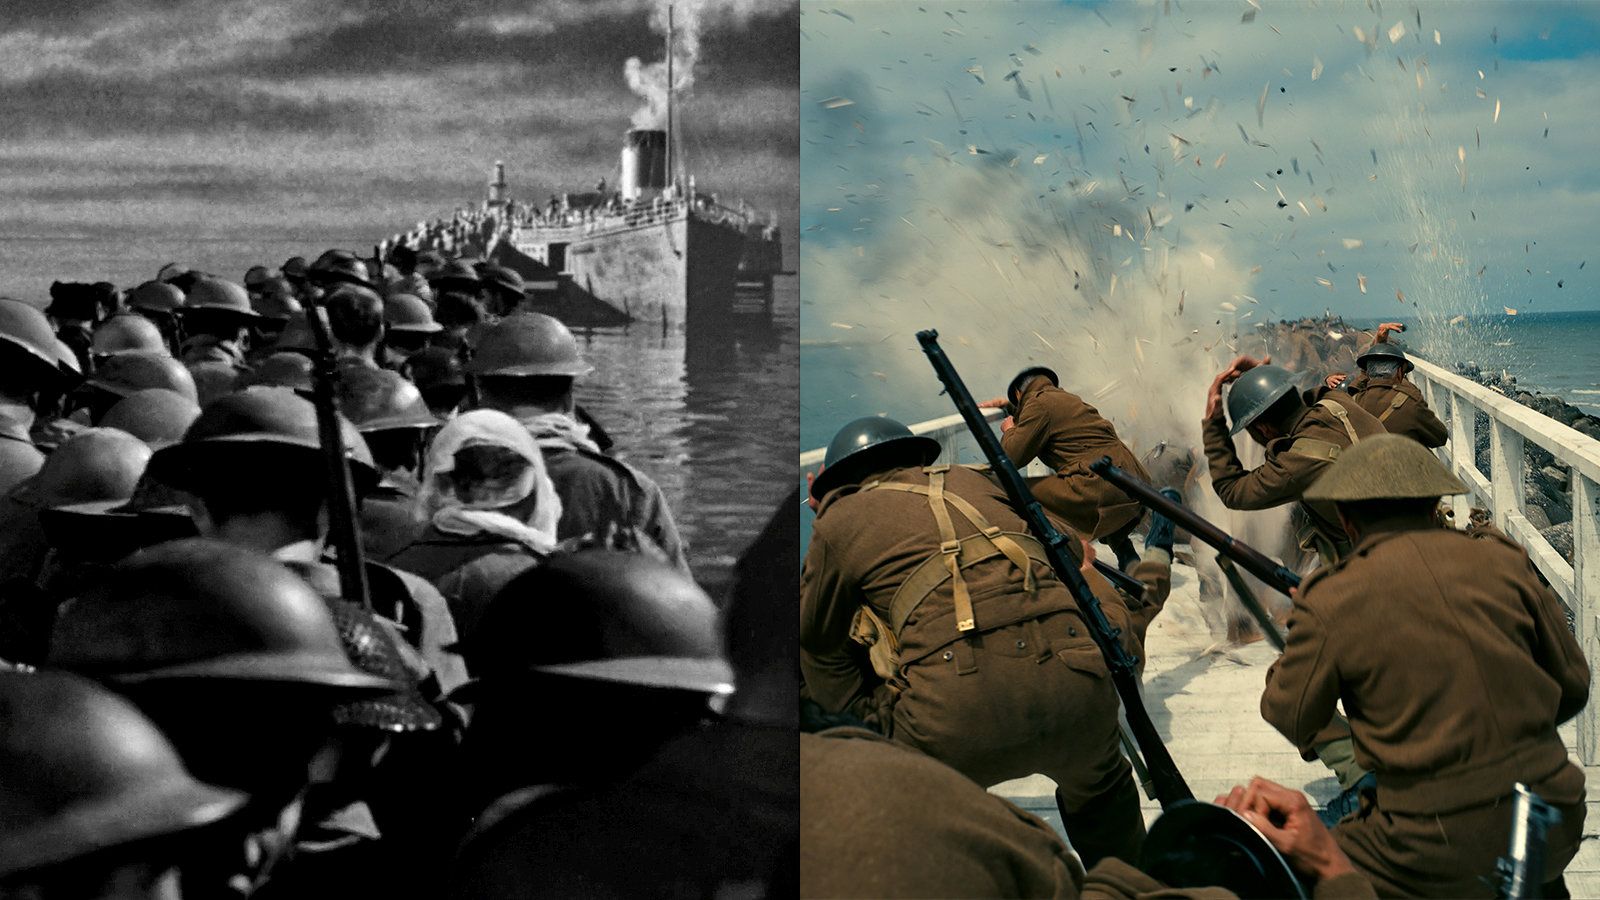 Six Films to Stream if You Loved 'Dunkirk'